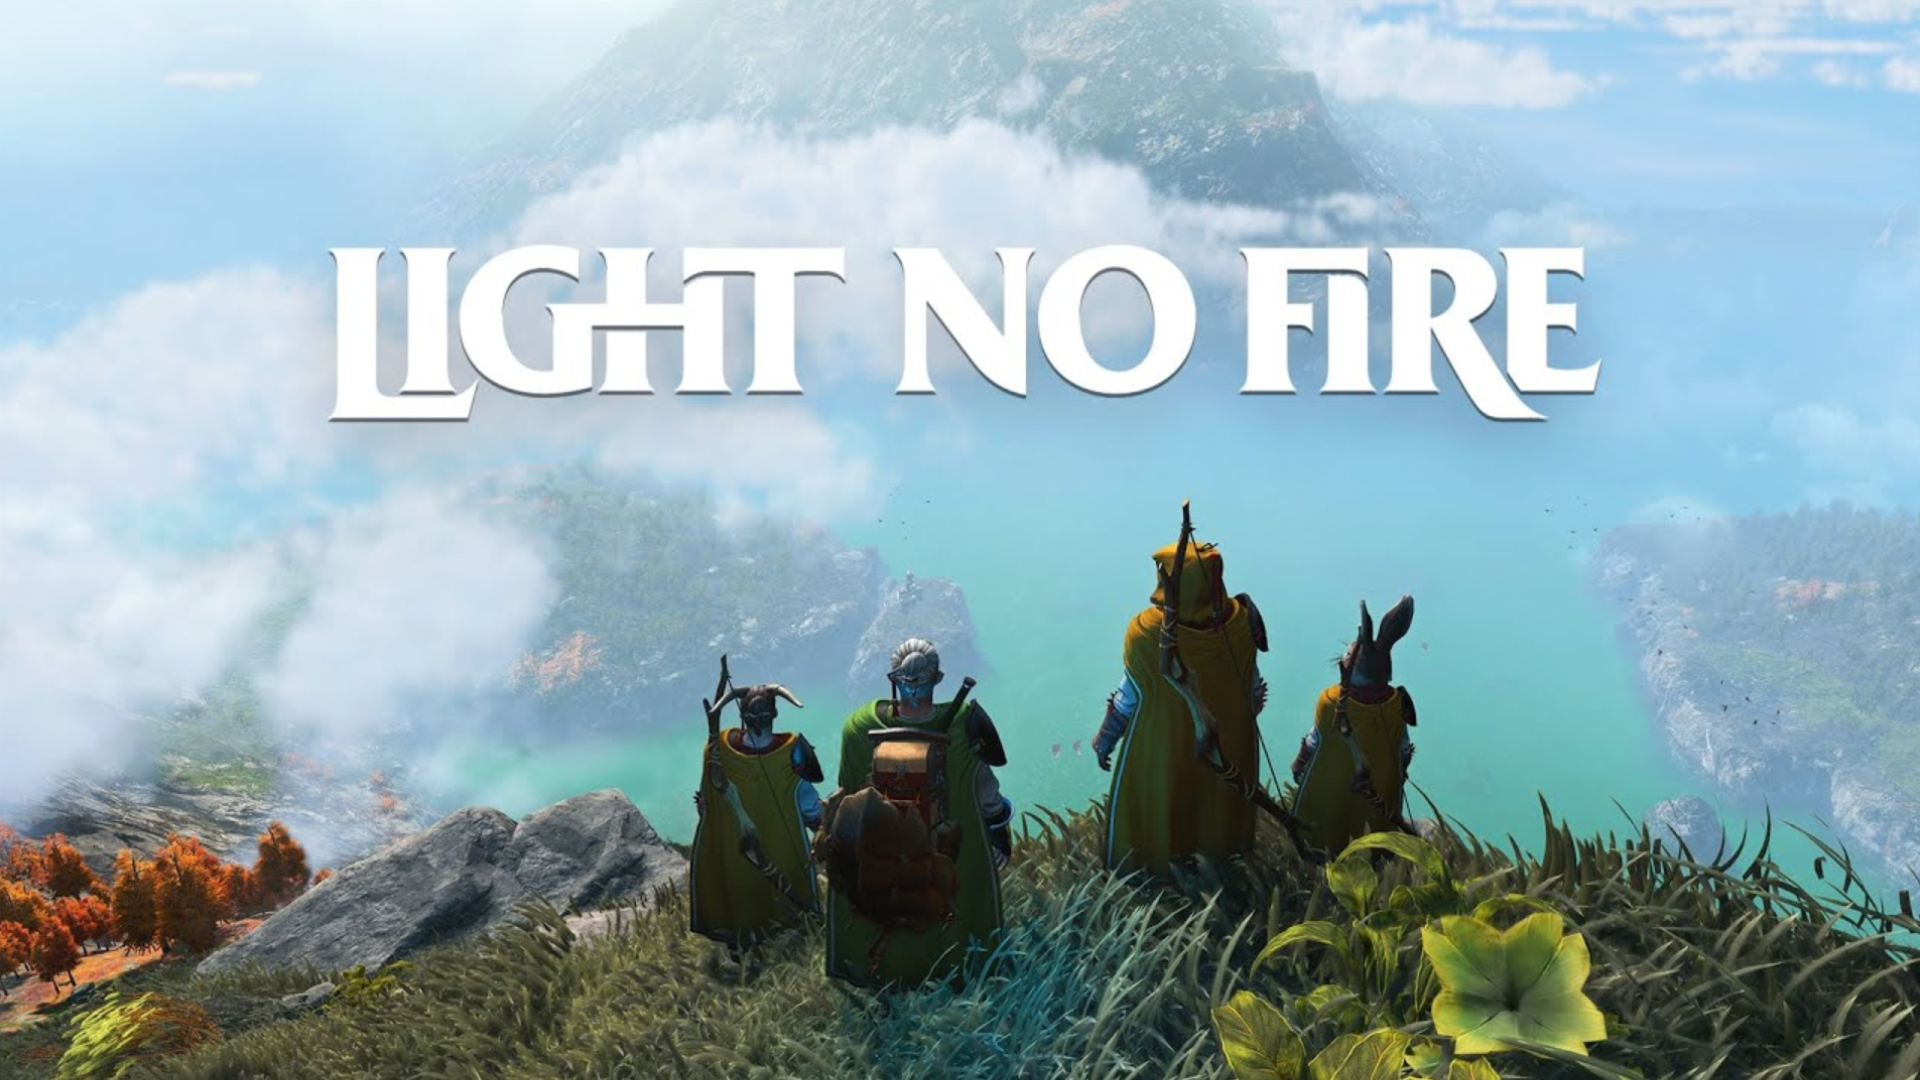 Light No Fire Trailer Released - "Something very different, something more ambitious."